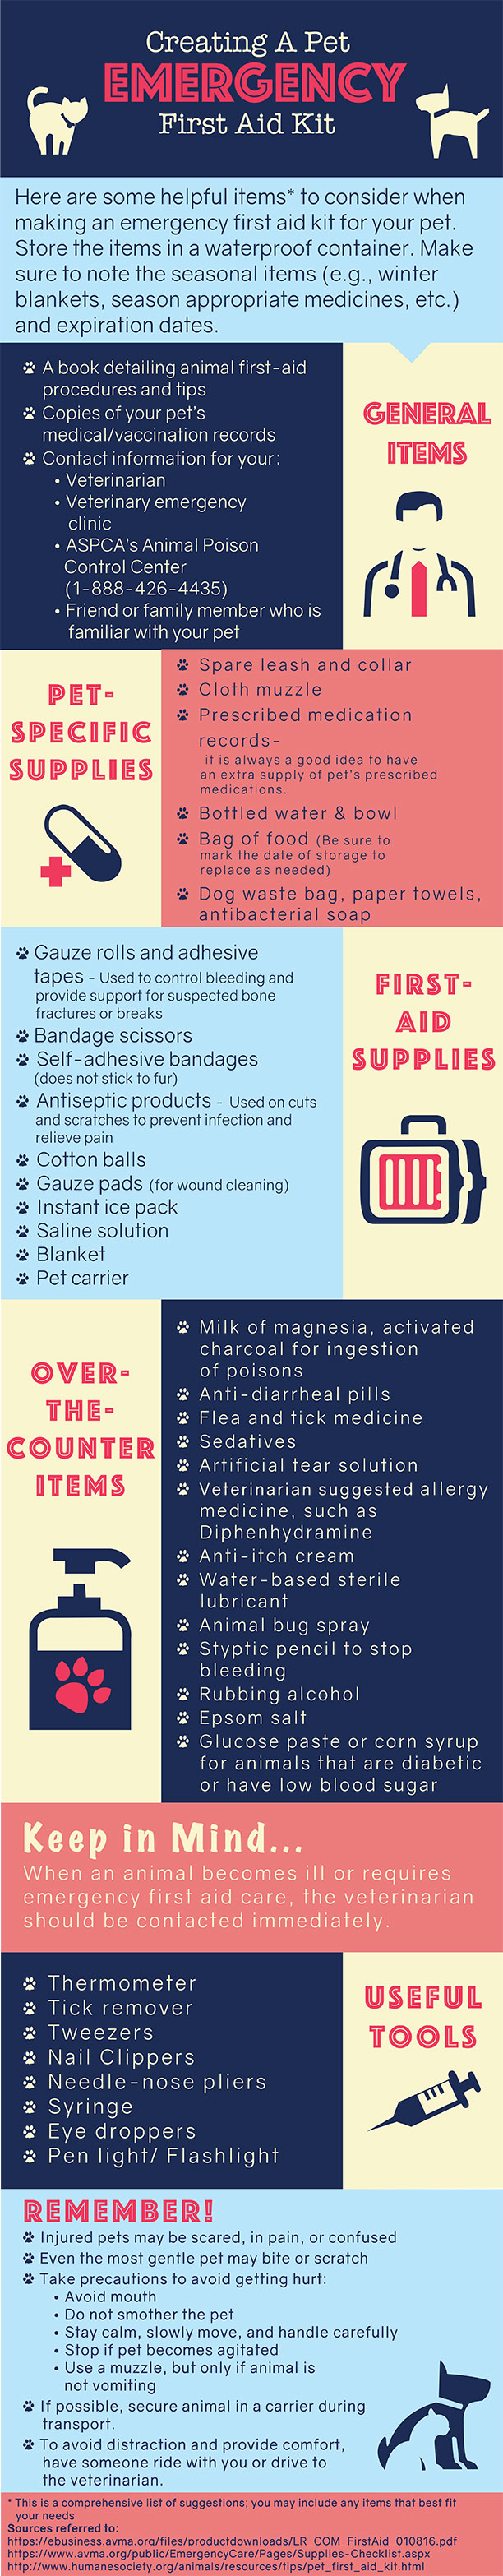 Emergency Fist Aid Kit Infographic